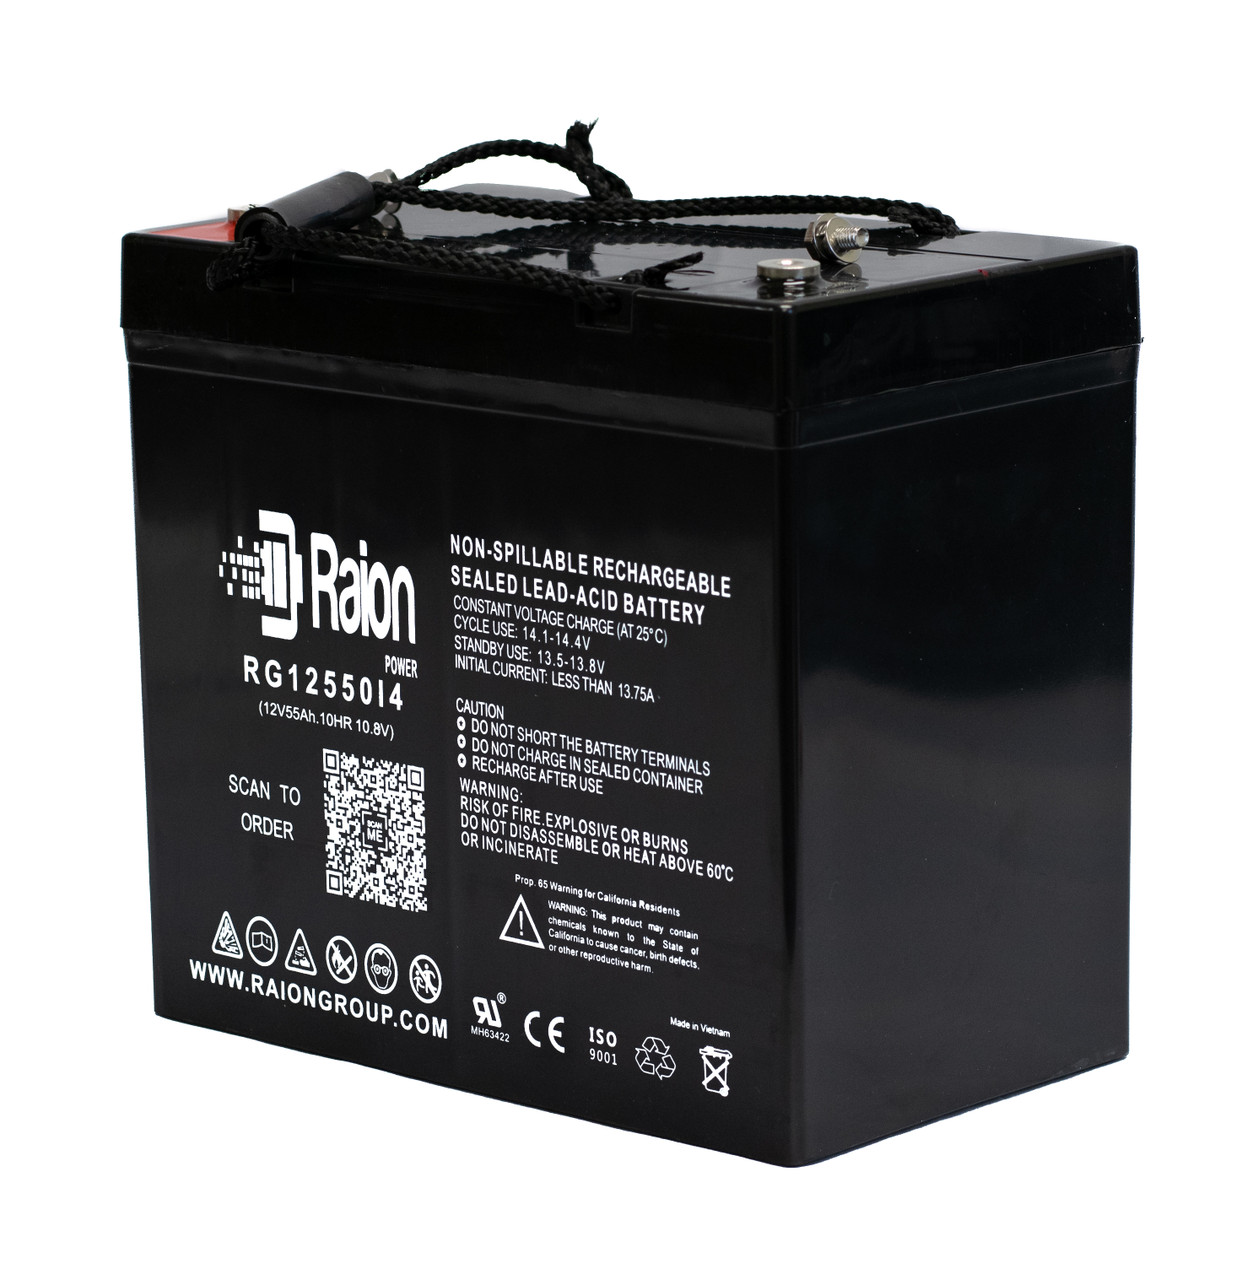 Raion Power 12V 55Ah 22NF Mobility Scooter Battery Replacement for Pride Mobility Jazzy 1133